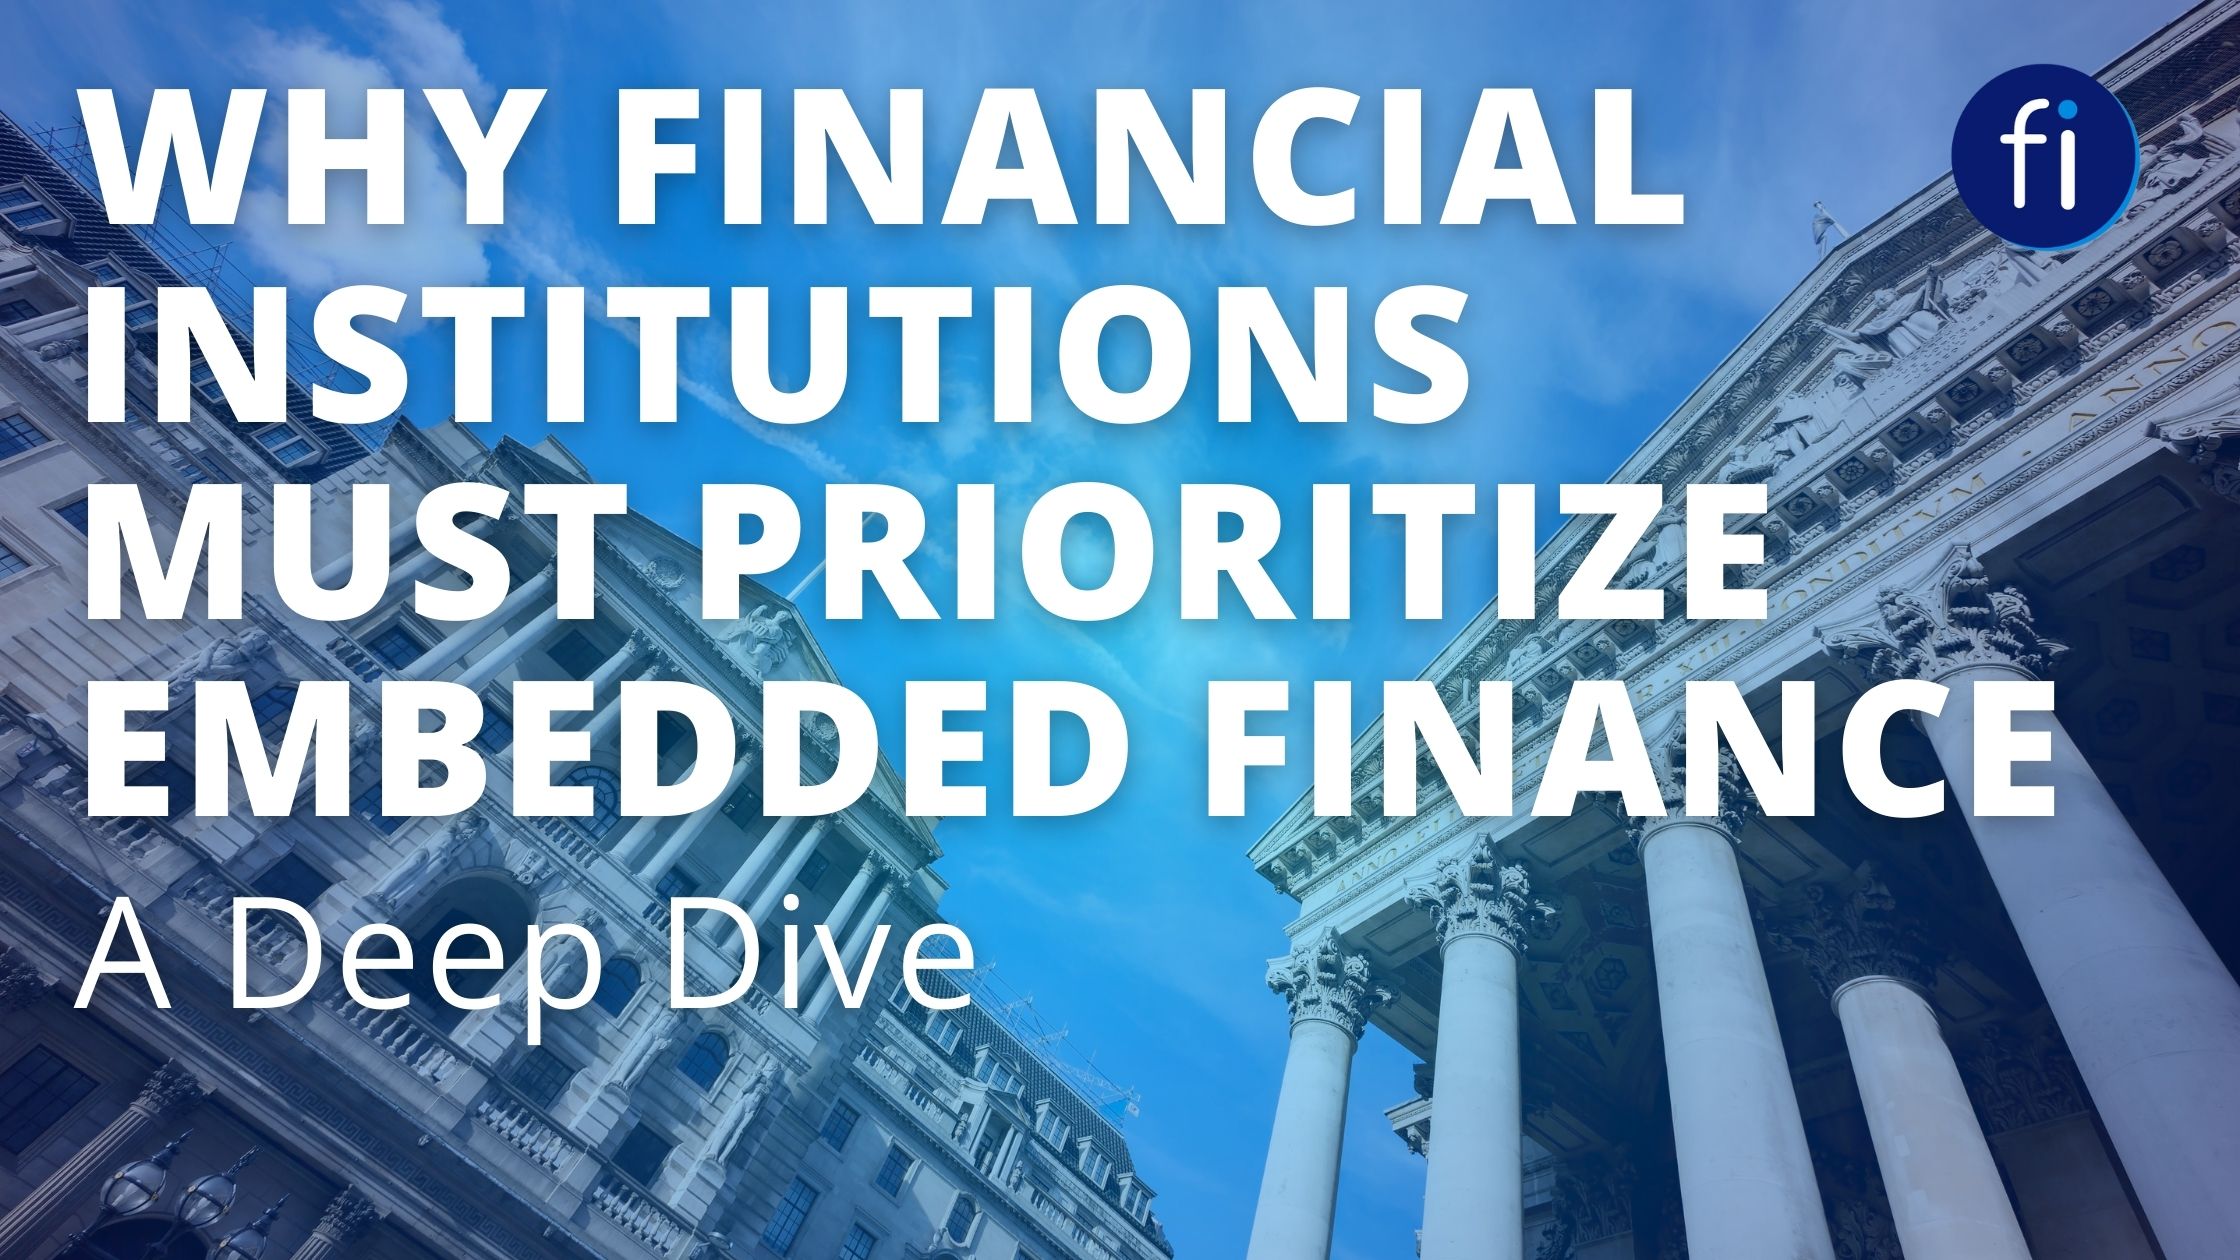 Why Financial Institutions Must Prioritize Embedded Finance: A Deep Dive